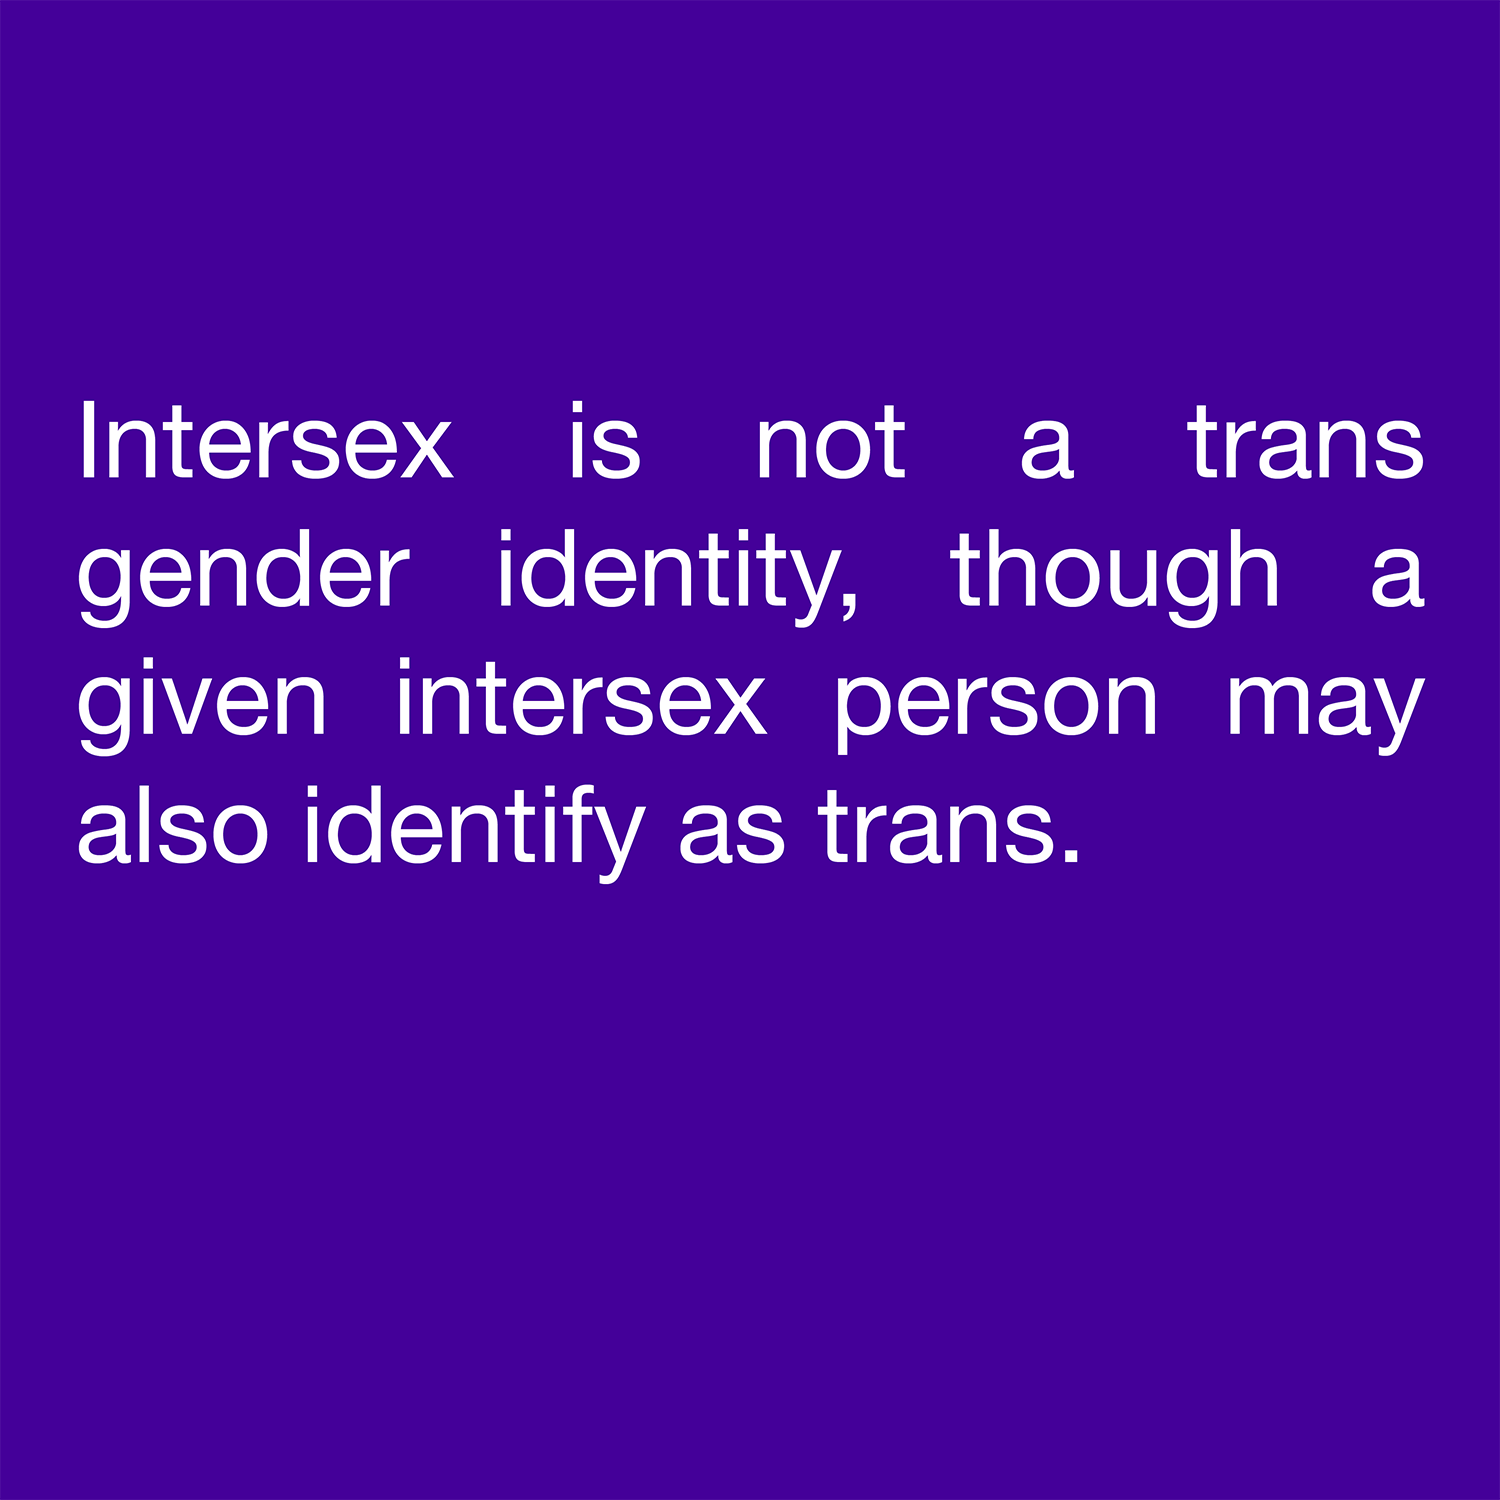  Intersex is not a trans gender identity, though a given intersex person may also identify as trans. 